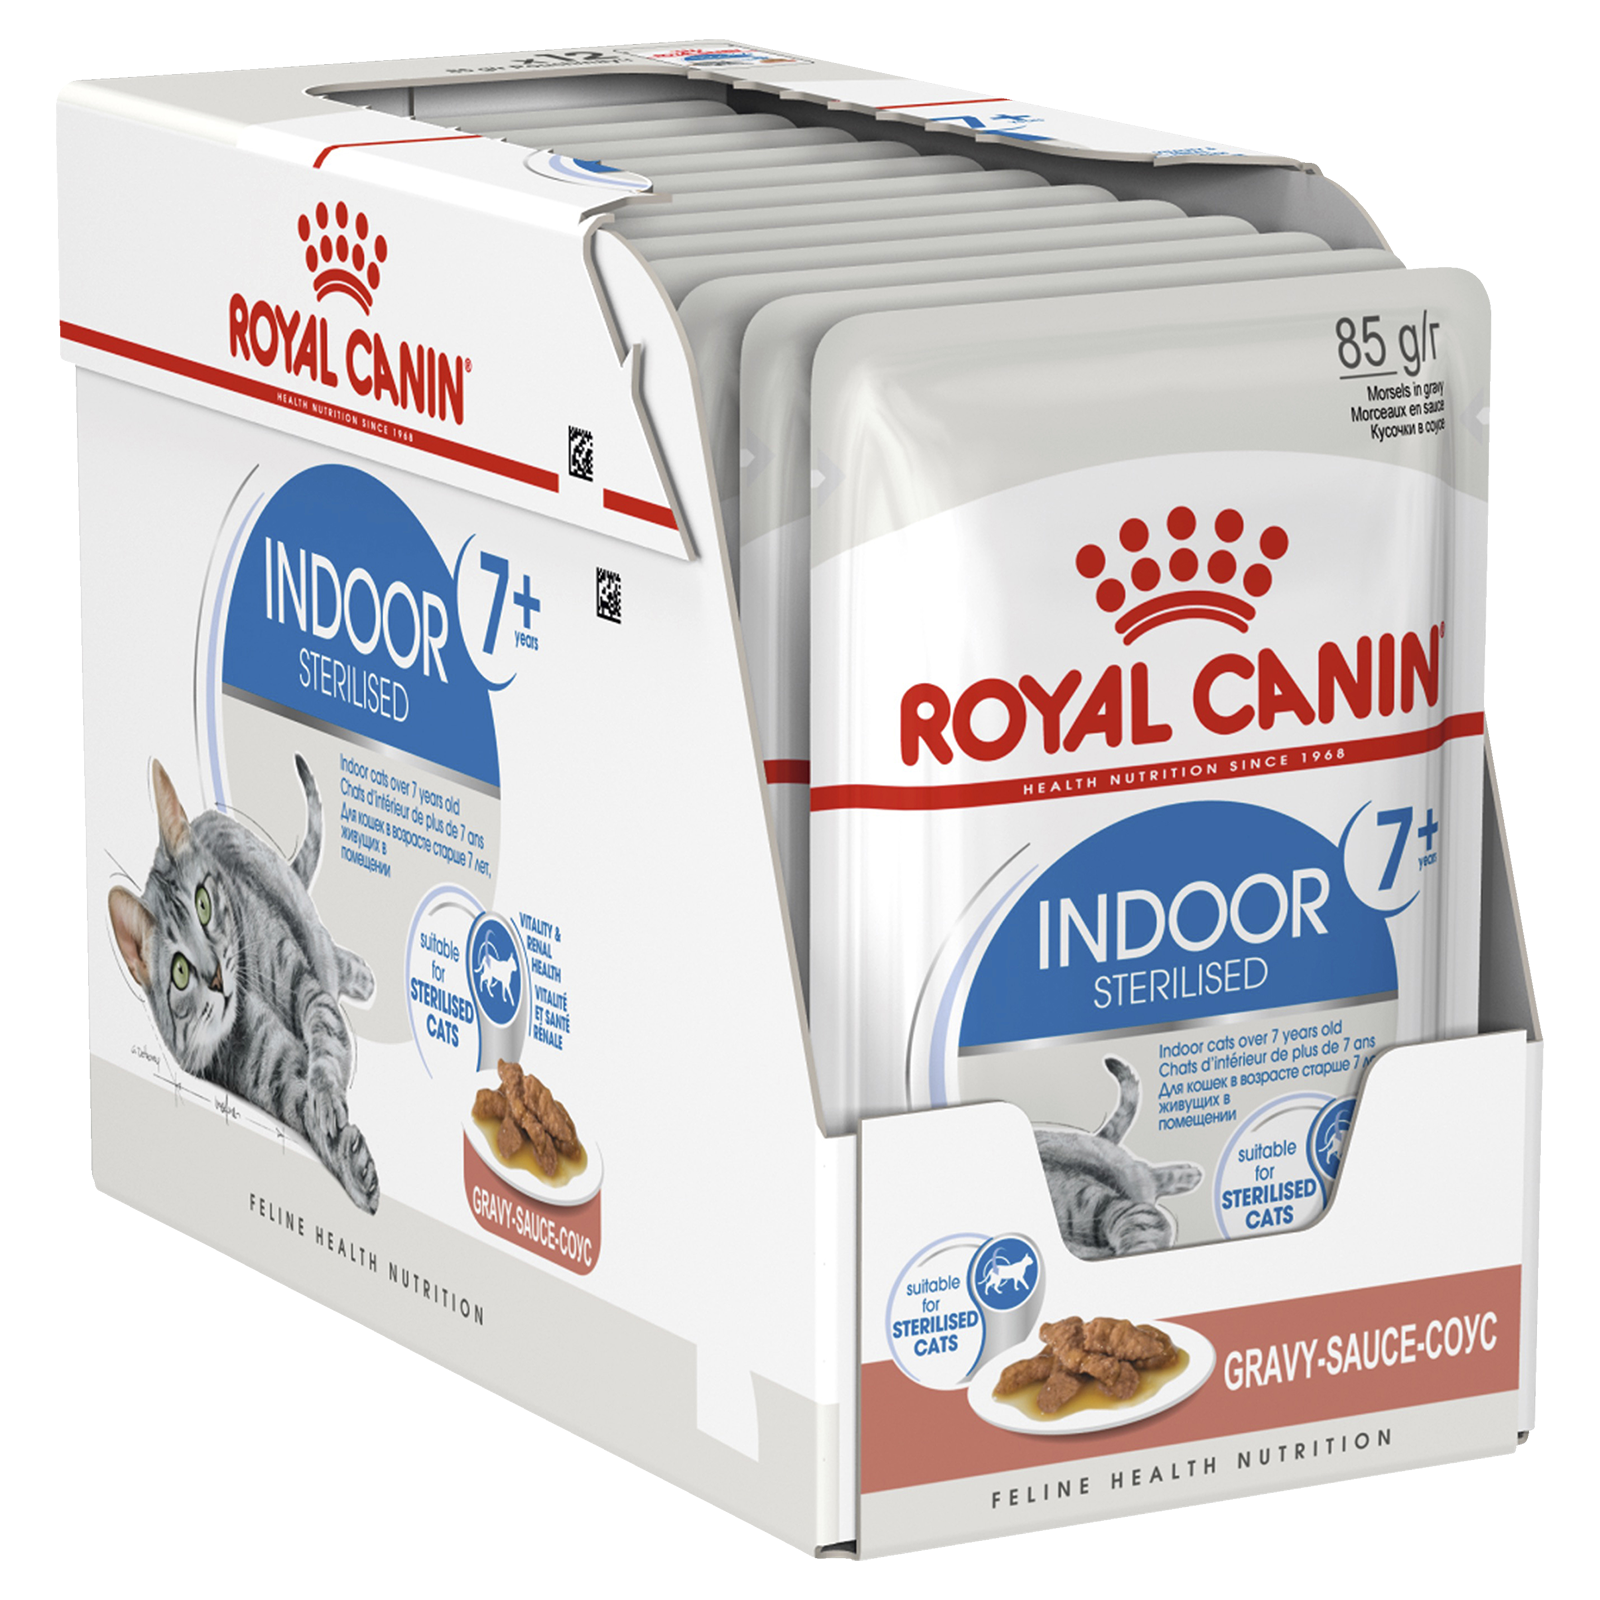 Royal Canin Cat Food Pouch Adult 7+ Indoor